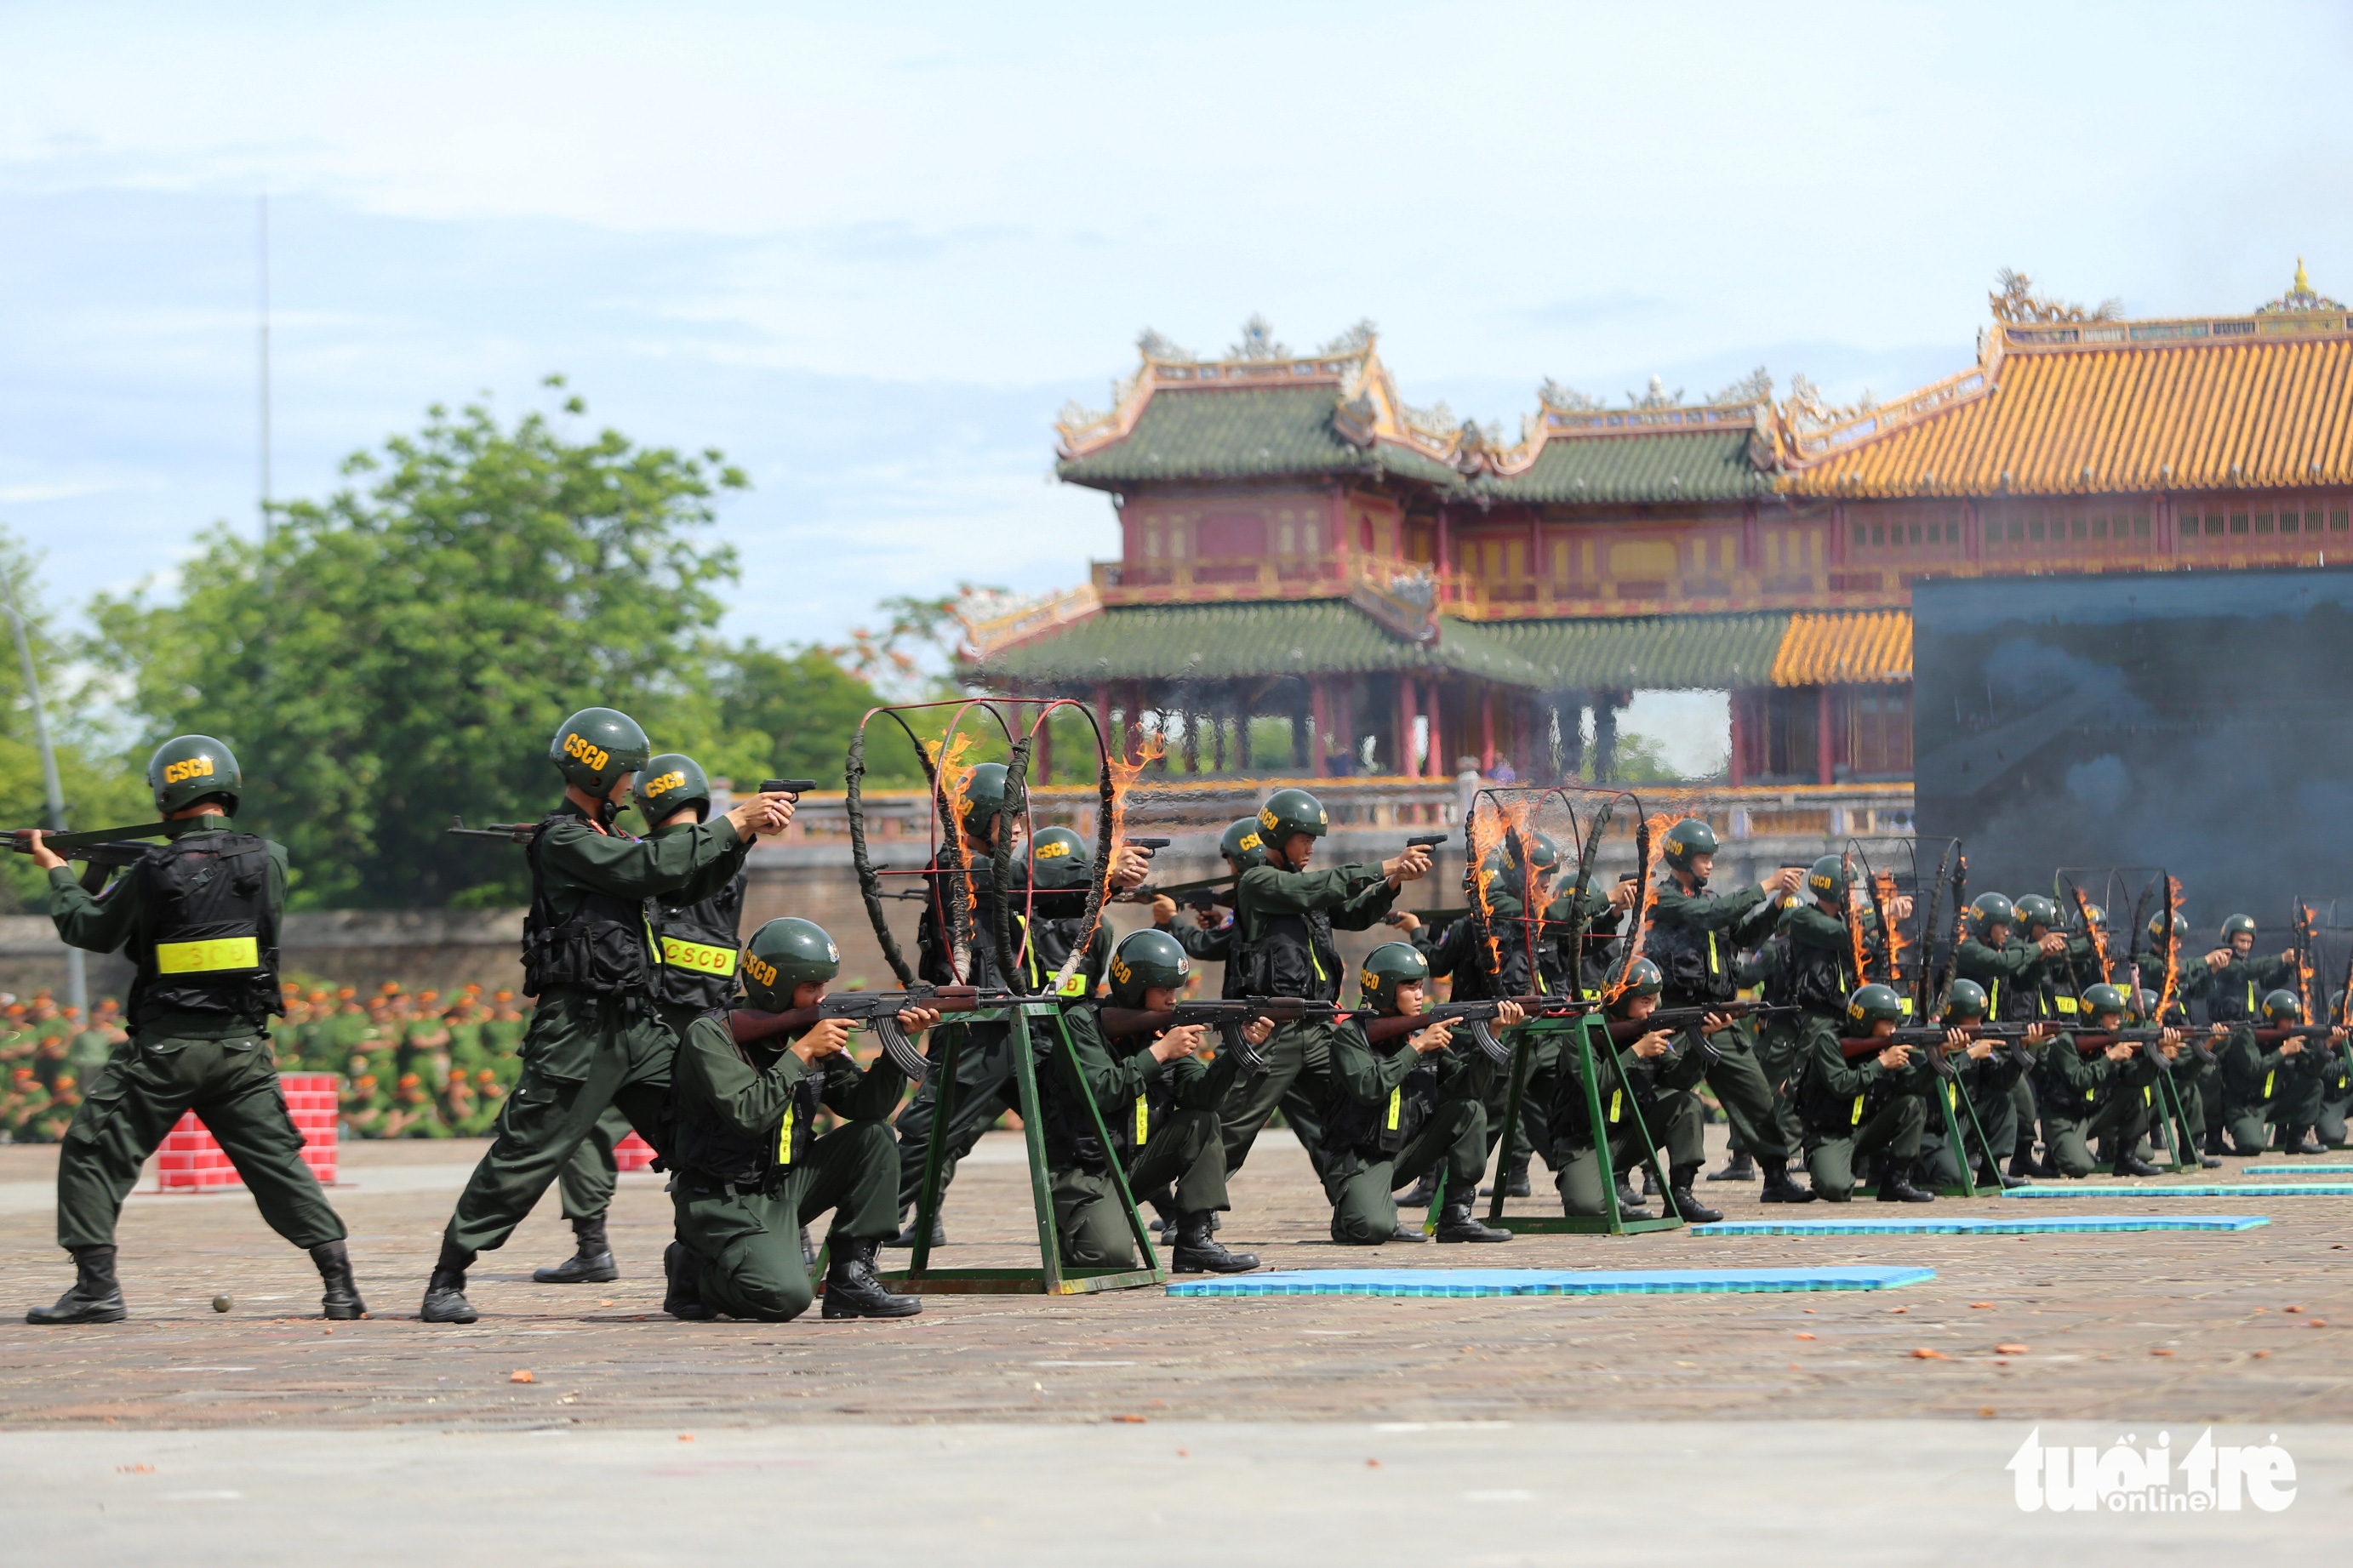 A shooting performance during the opening ceremony of the competition's final round in Thua Thien-Hue Province, Vietnam, July 4, 2022. Photo: N.Anh / Tuoi Tre